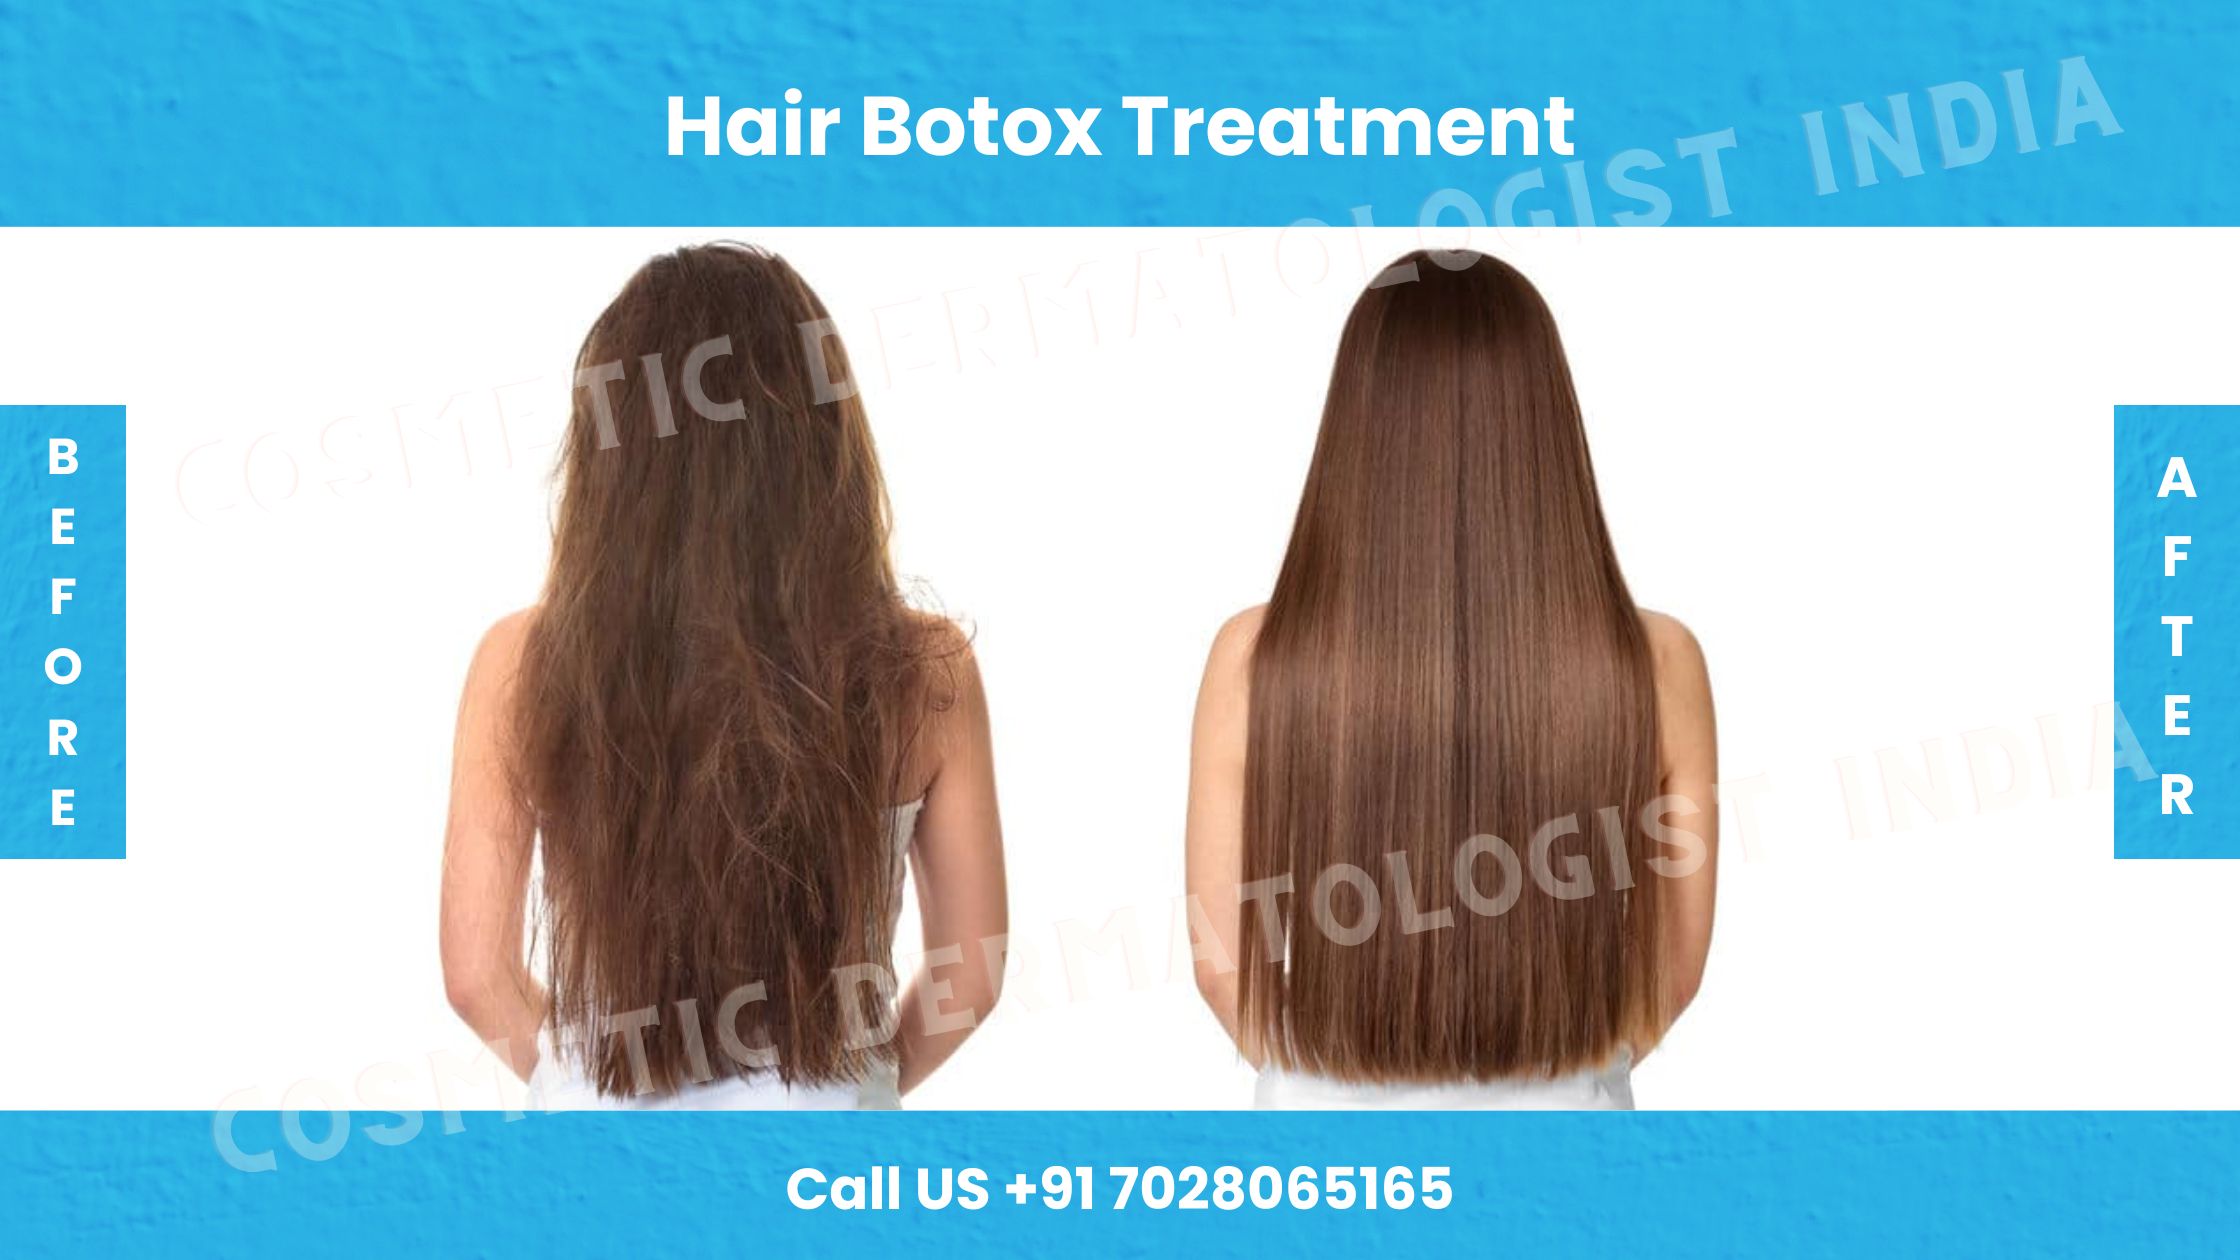 HAIR MASK FOR DAMAGED HAIR BLONDE BONDOX TREATMENT 1kg Thermal Activated  Mask for Dry Frizzy Hair | Formaldehyde Free | Results for up to 1-3 months  | Almond Oil Hair Repair :